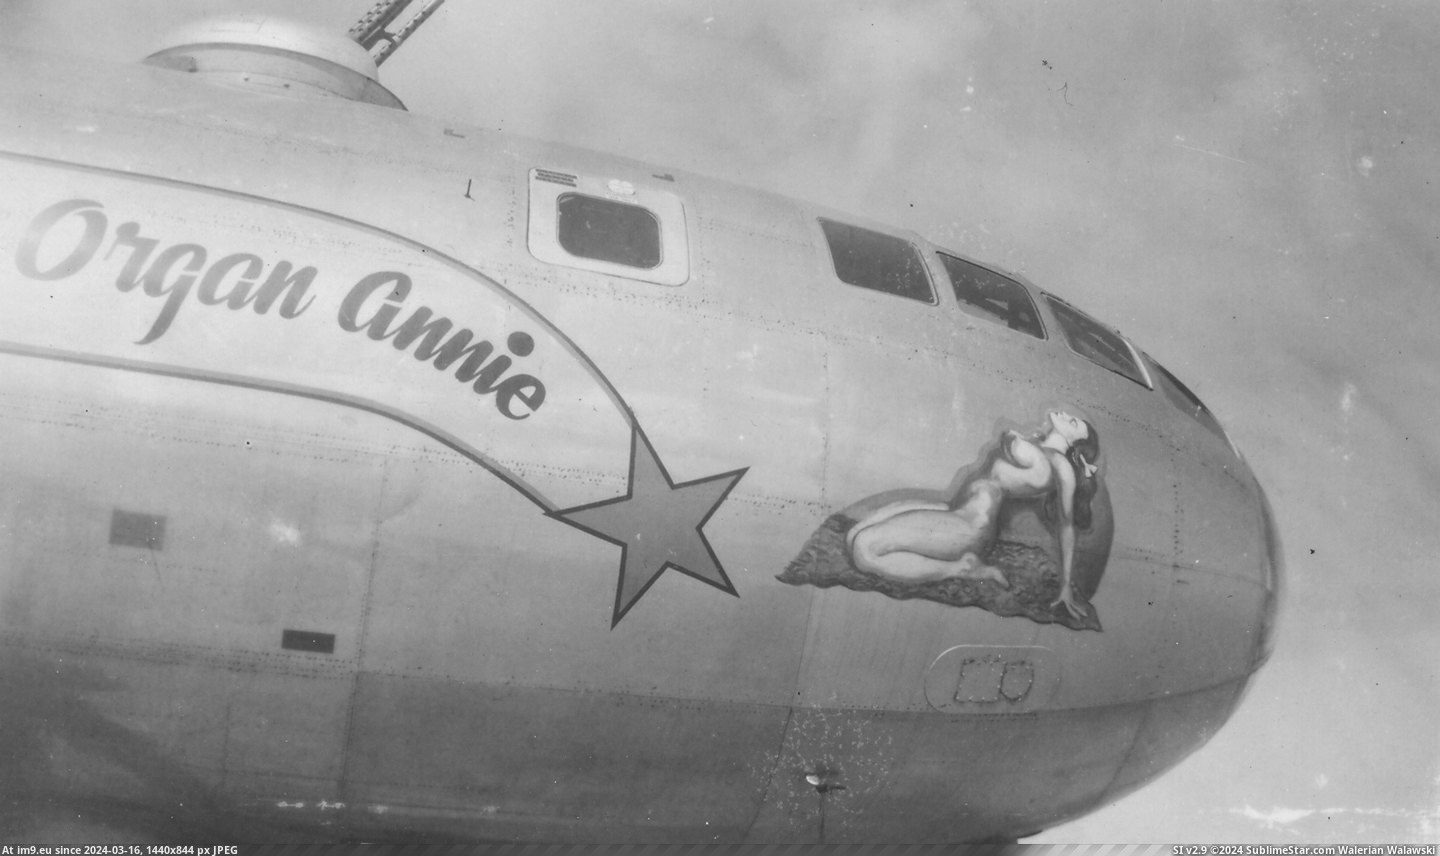 #Art #Posting #Nose #Ww2 #Galore #Guess #Grandfather [Pics] Guess I can get away with posting my Grandfather's pictures from WW2 today. Nose art galore. 26 Pic. (Bild von album My r/PICS favs))